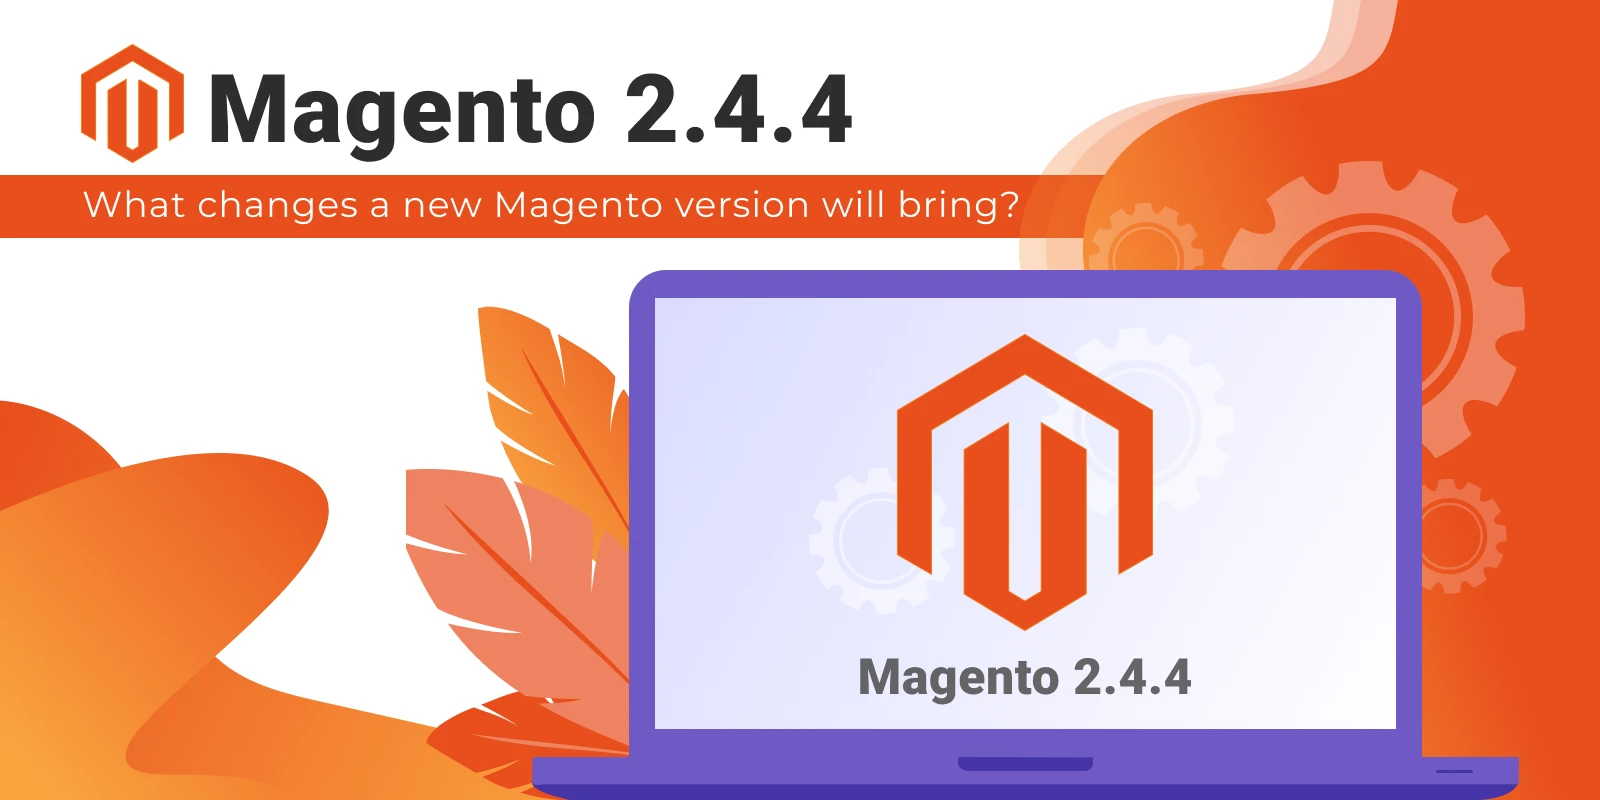 New Magento 2.4.4 is coming - what will it bring?